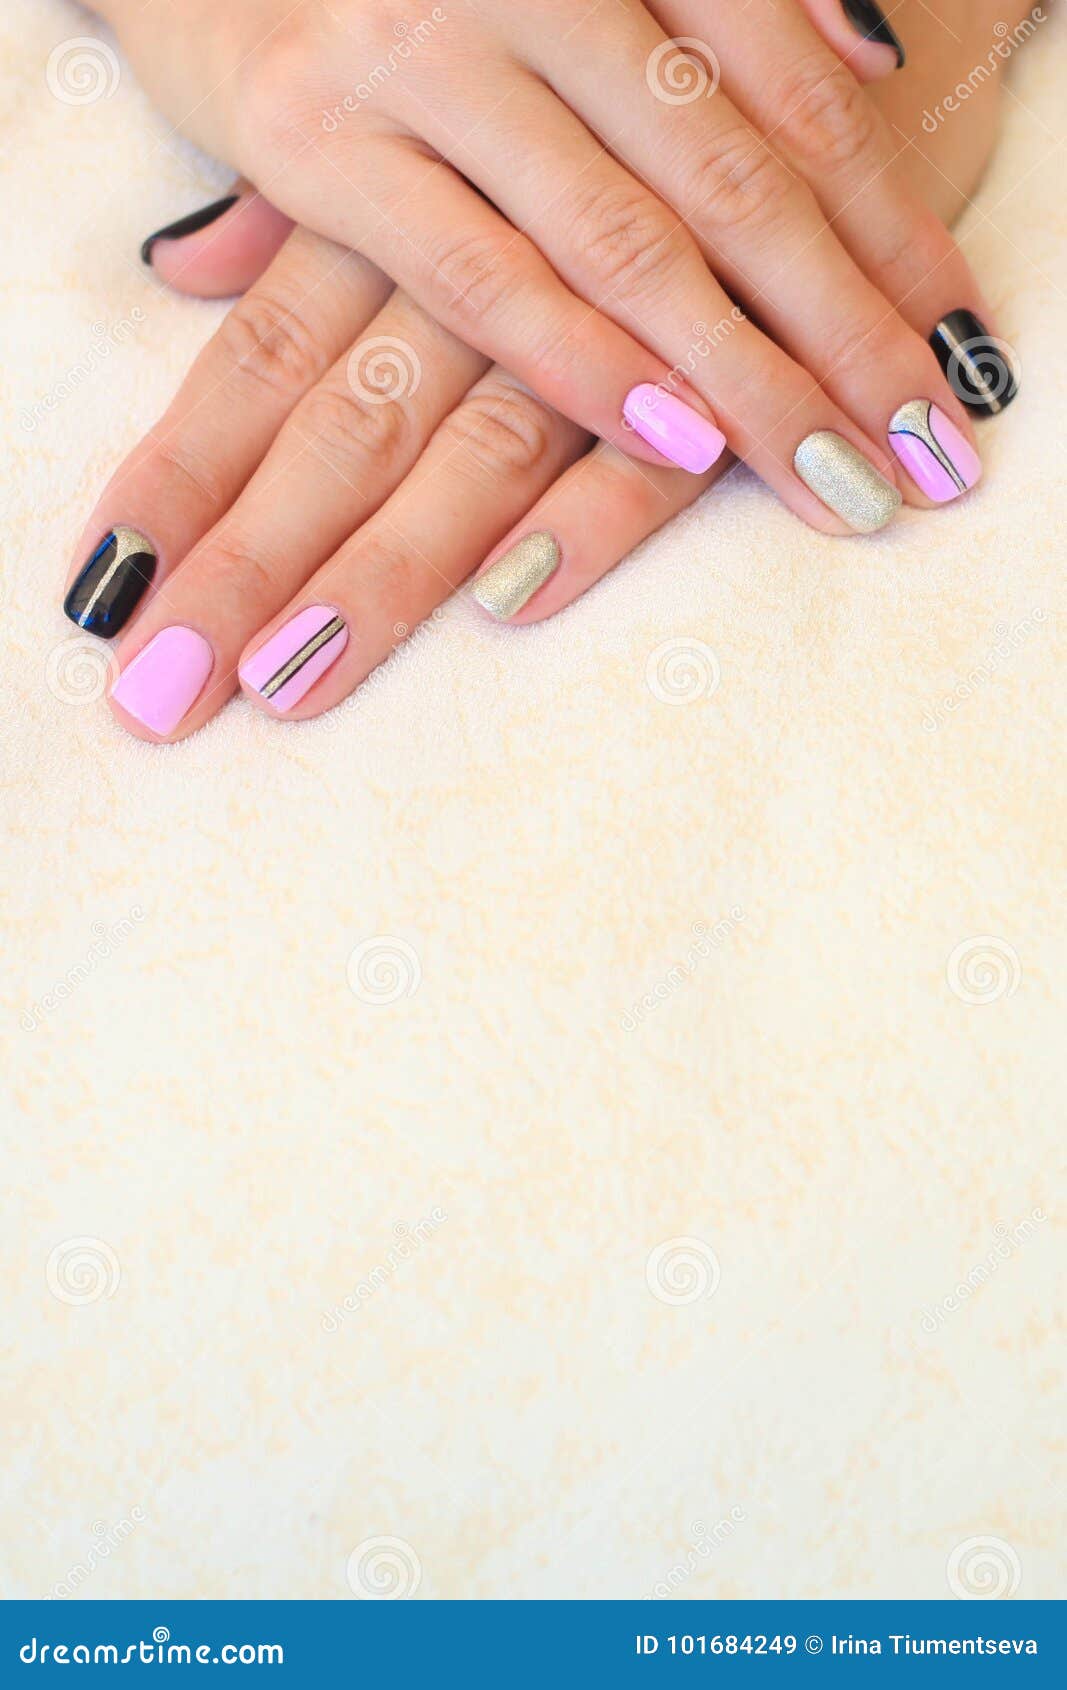 Fire Flame Ghost Face Ballerina Acrylic Nails Designs Fashionable Y2K Nail  Art Stickers In Pink, Black, And White Popular Whole Sale Nailing  Accessories X0826 From Us_mississippi, $5.27 | DHgate.Com